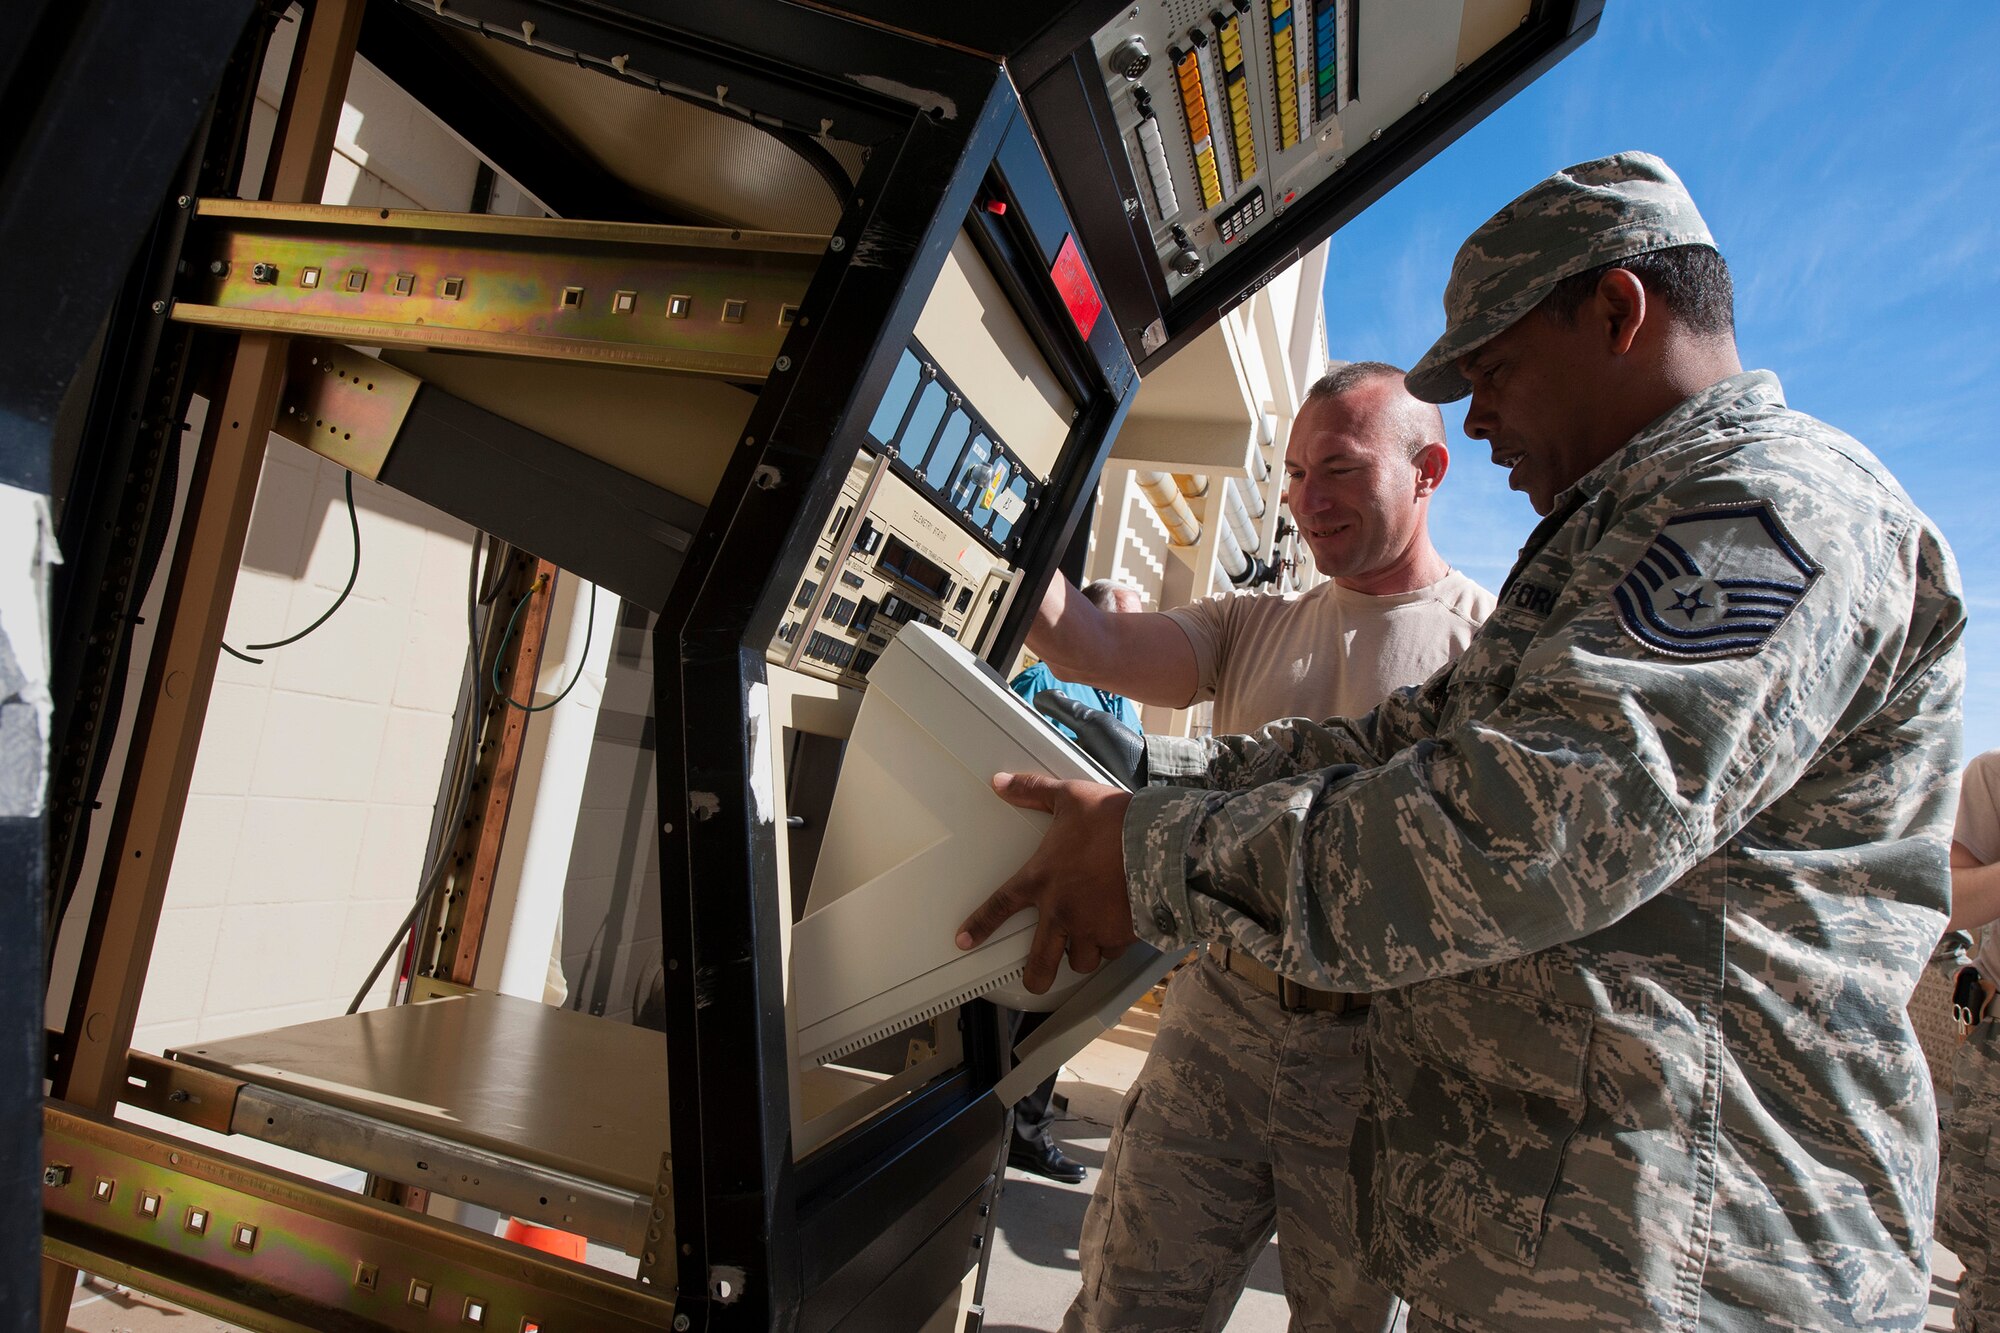 Master Sgt. Maurice McKenniss, 270th Engineering Installation Squadron, Range Simulation Center Installer, and TSgt Mark Yurkiewicz, 270th EIS, Telemetry Analog Equipment Room Installer, disassemble a legacy console unit from the Launch and Test Range System prior to its relocation to Vandenberg's Space and Missile Heritage Center March 2, 2016, Vandenberg Air Force Base, Calif. McKenniss and Yurkiewicz are part of an Air National Guard EI team working on a relocation of the Launch and Test Range System for the Western Range. (U.S. Air Force photo by Michael Peterson/released)